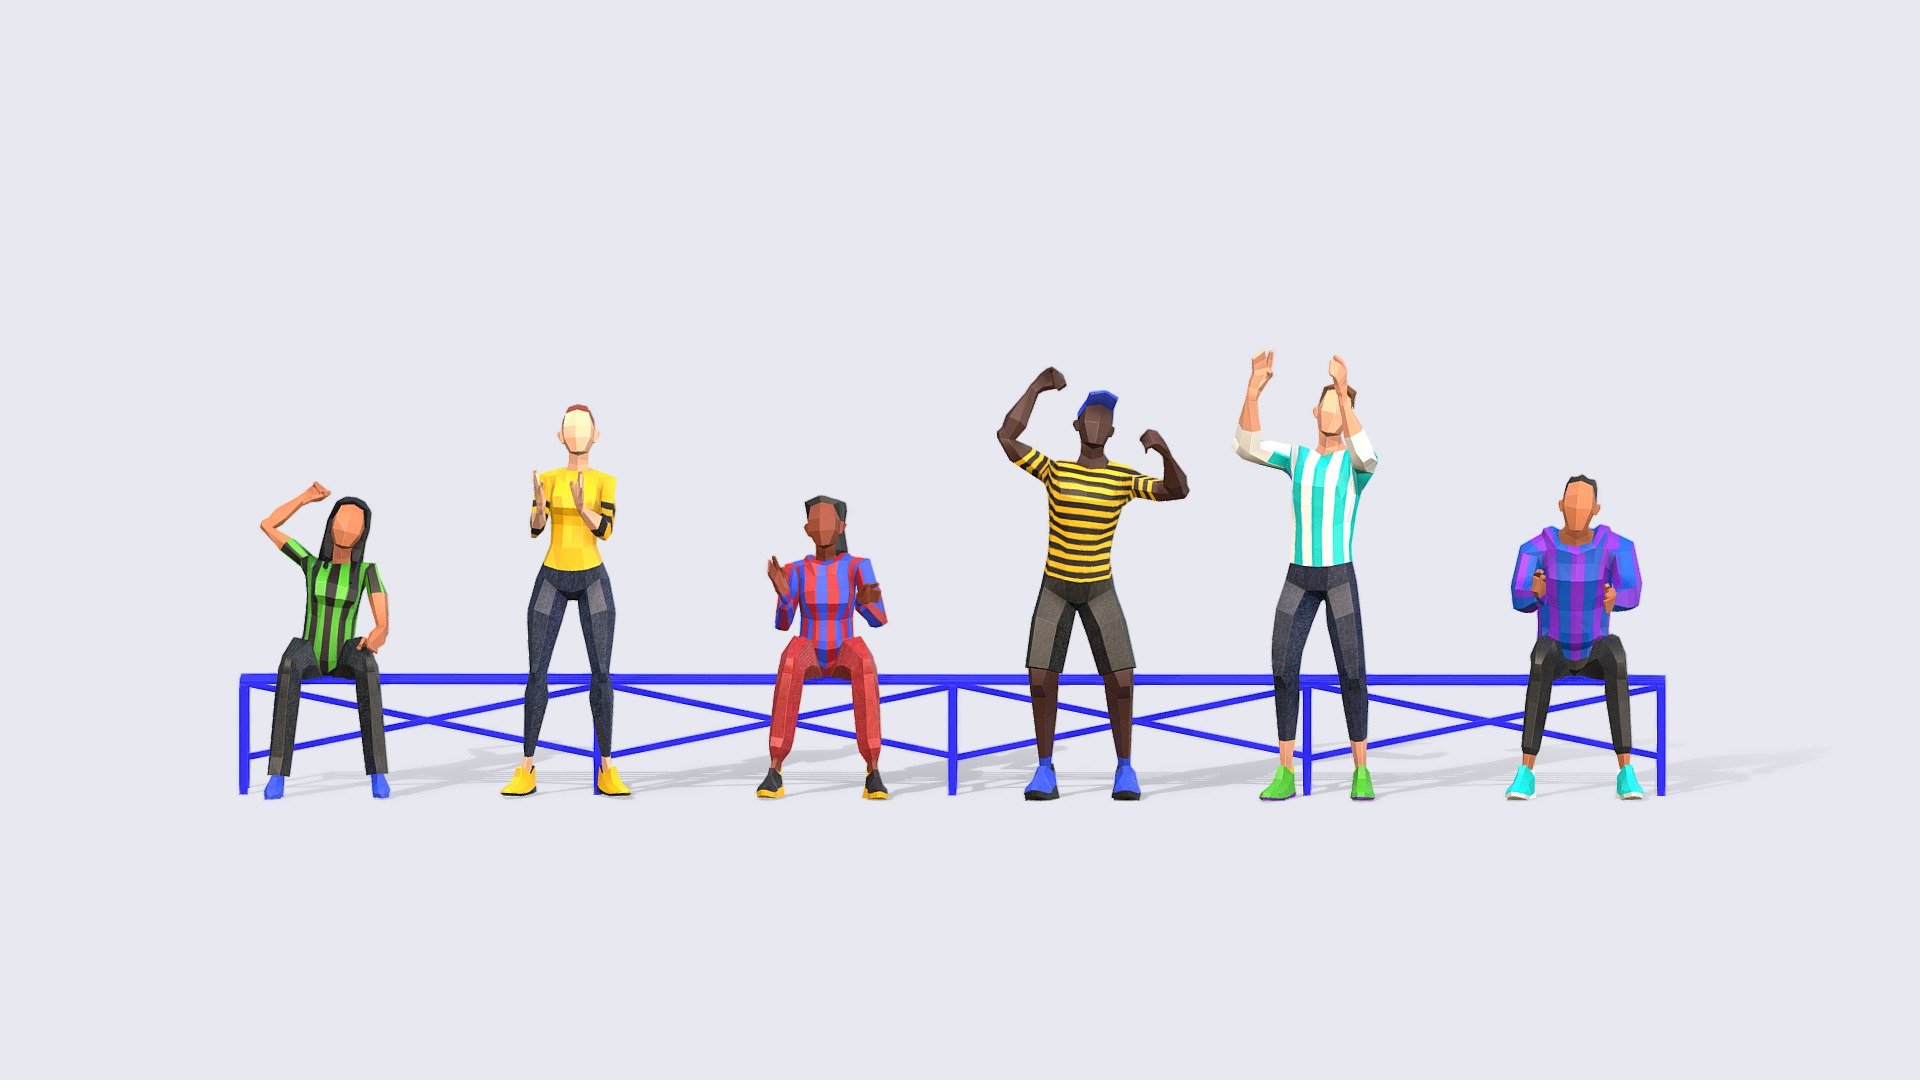 CHEERING LOW POLY PEOPLE
A super versatile pack of Low Poly People where all models interact. Plus all models can use the same or vary the 6 different textures.

INCLUDES:




Independent Rest Pose fin FBX, perfect for Animating with mixamo or your chosen platform

Independent Animated FBX file that includes all 6 looping animations -100 frames

Full Pack Blender Native file with all characters together.

Textures created for the pack.


Give some unique style to your crowds with our collection of low poly people.
*3RD GENERATION of Animated Low-Poly People and it will be included in The Compilation - Cheering People - Animated & Rigged - Buy Royalty Free 3D model by Studio Ochi (@studioochi) 3d model